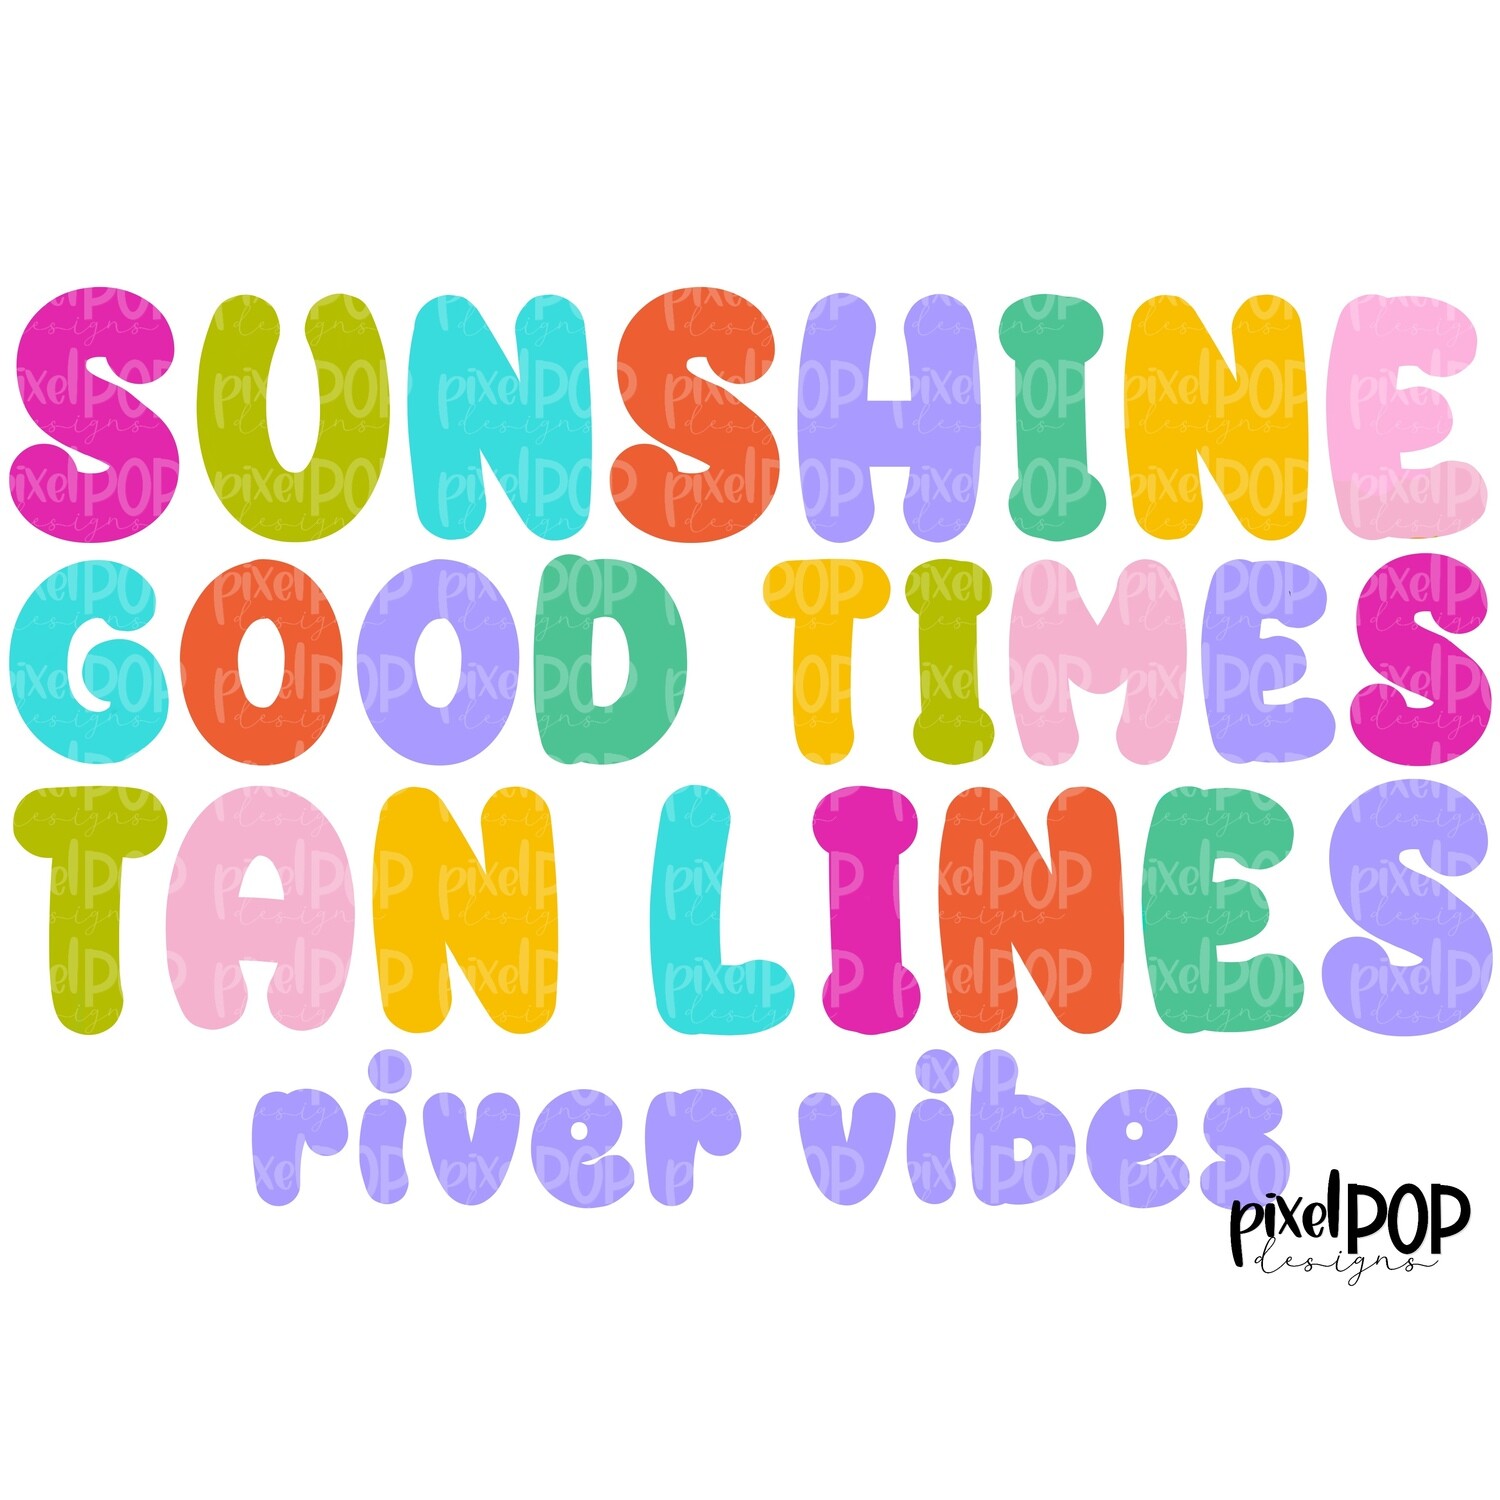 River Vibes Good Times Colorful PNG | Pool Vibes | Summer | Warm Weather | Digital Download | Printable Art | Clip Art